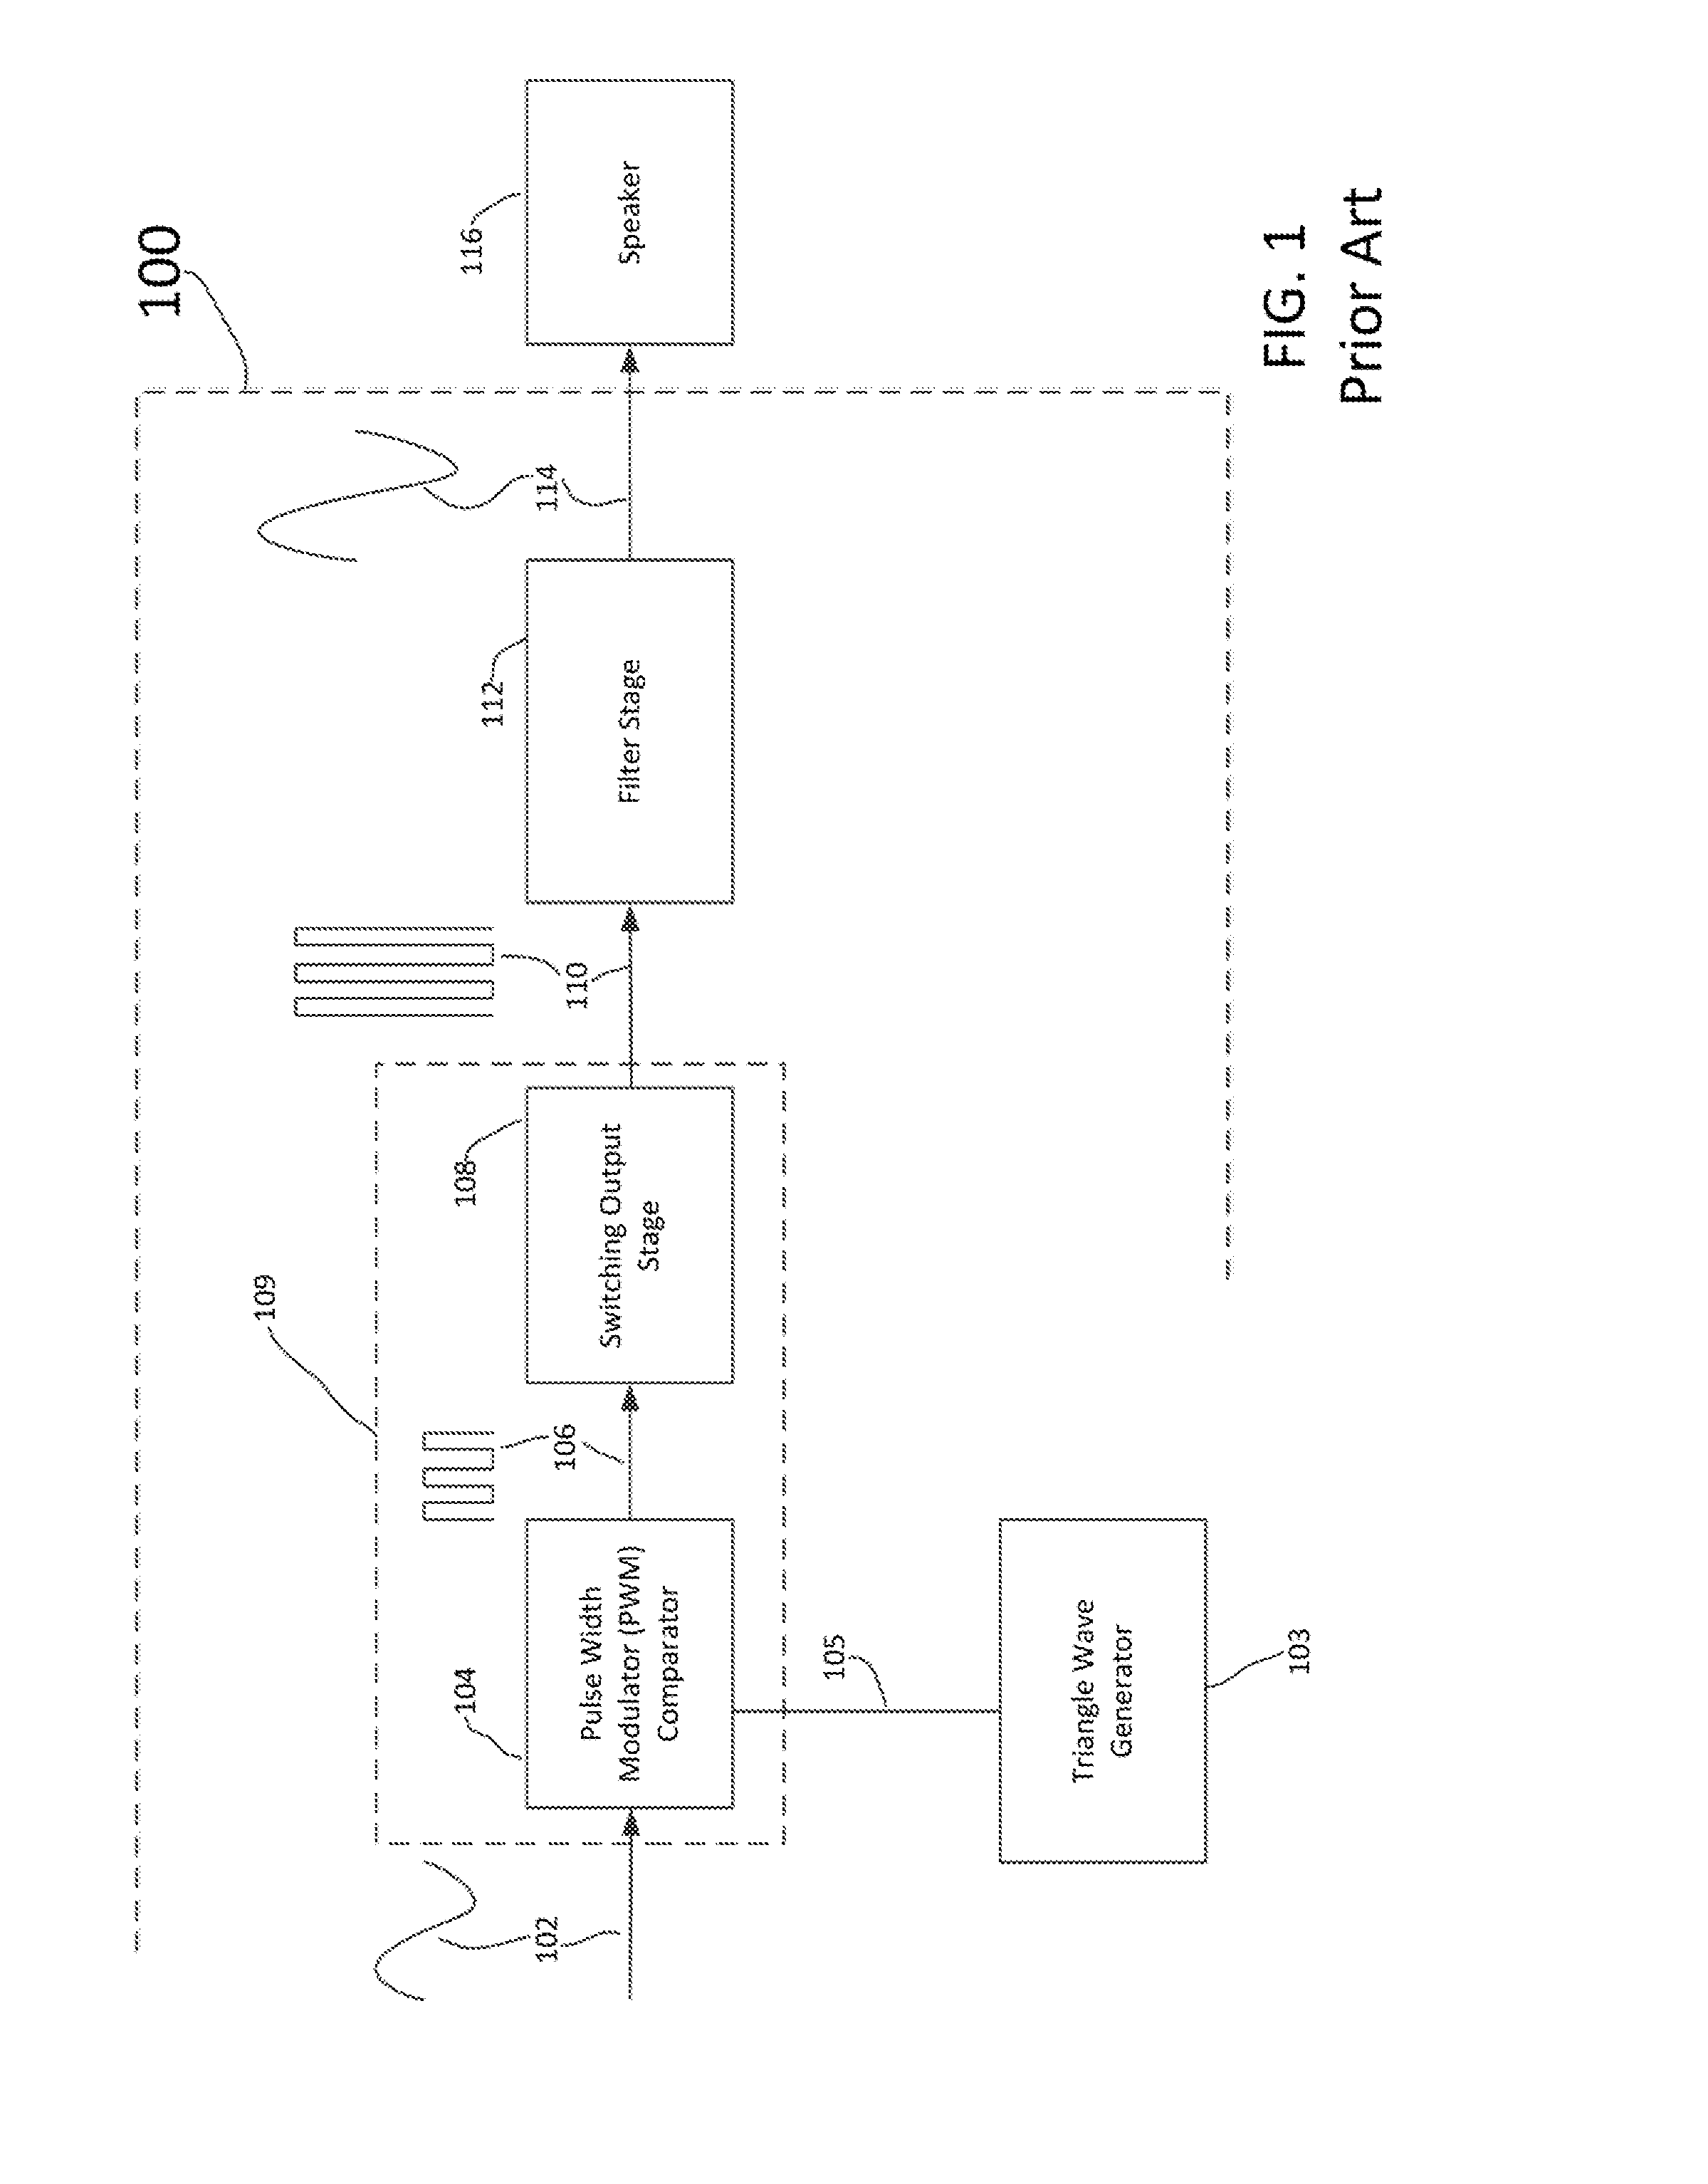 Average current-mode feedback control of multi-channel class-d audio amplifier